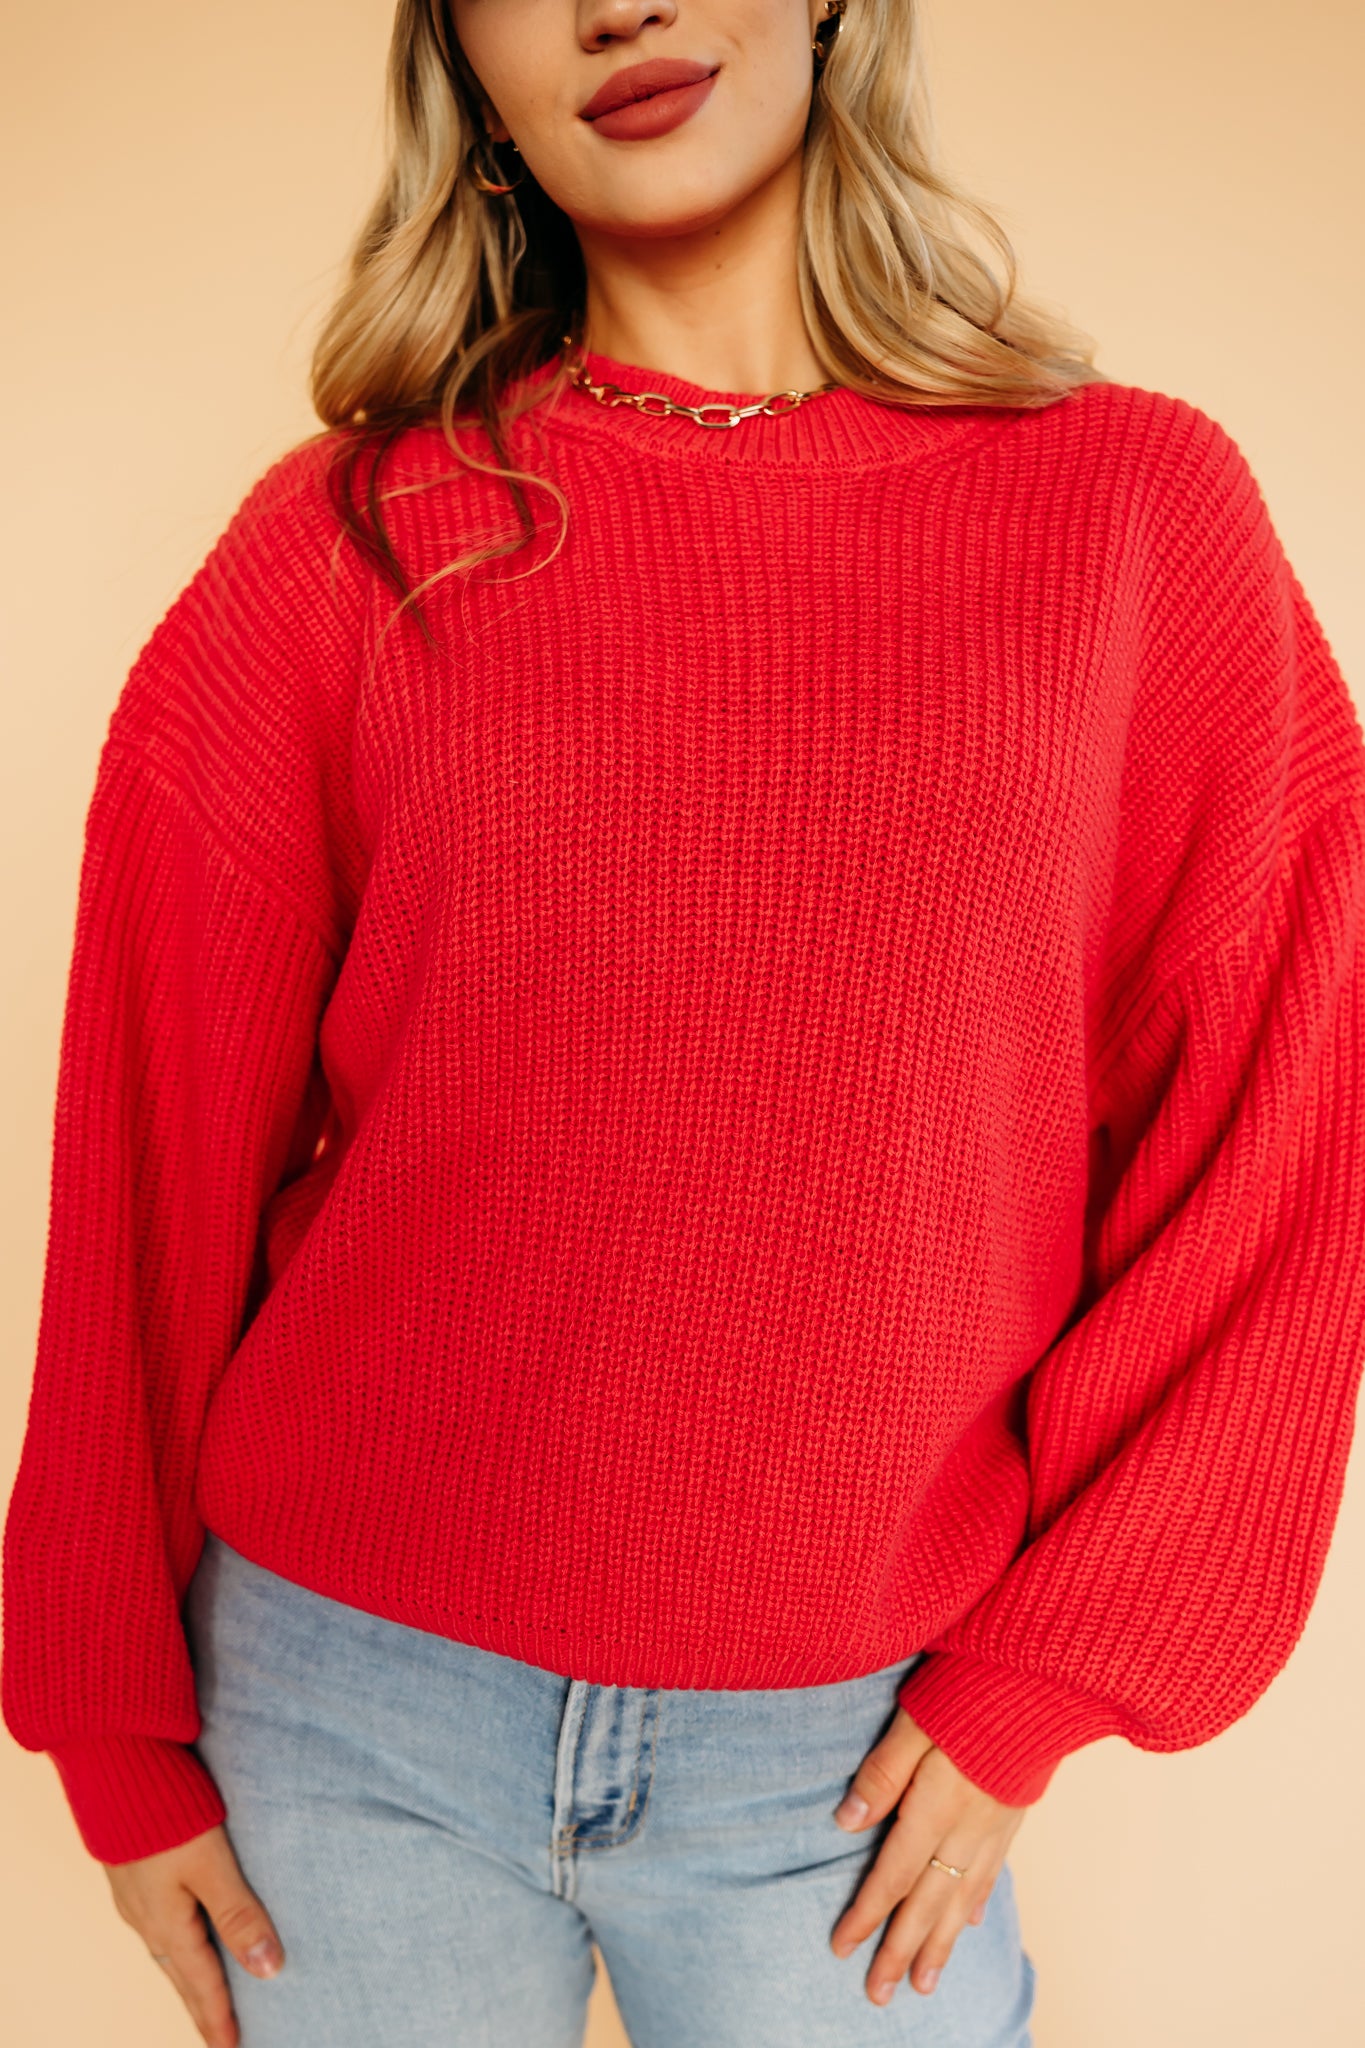 Thick knit sweater for women | PINK DESERT